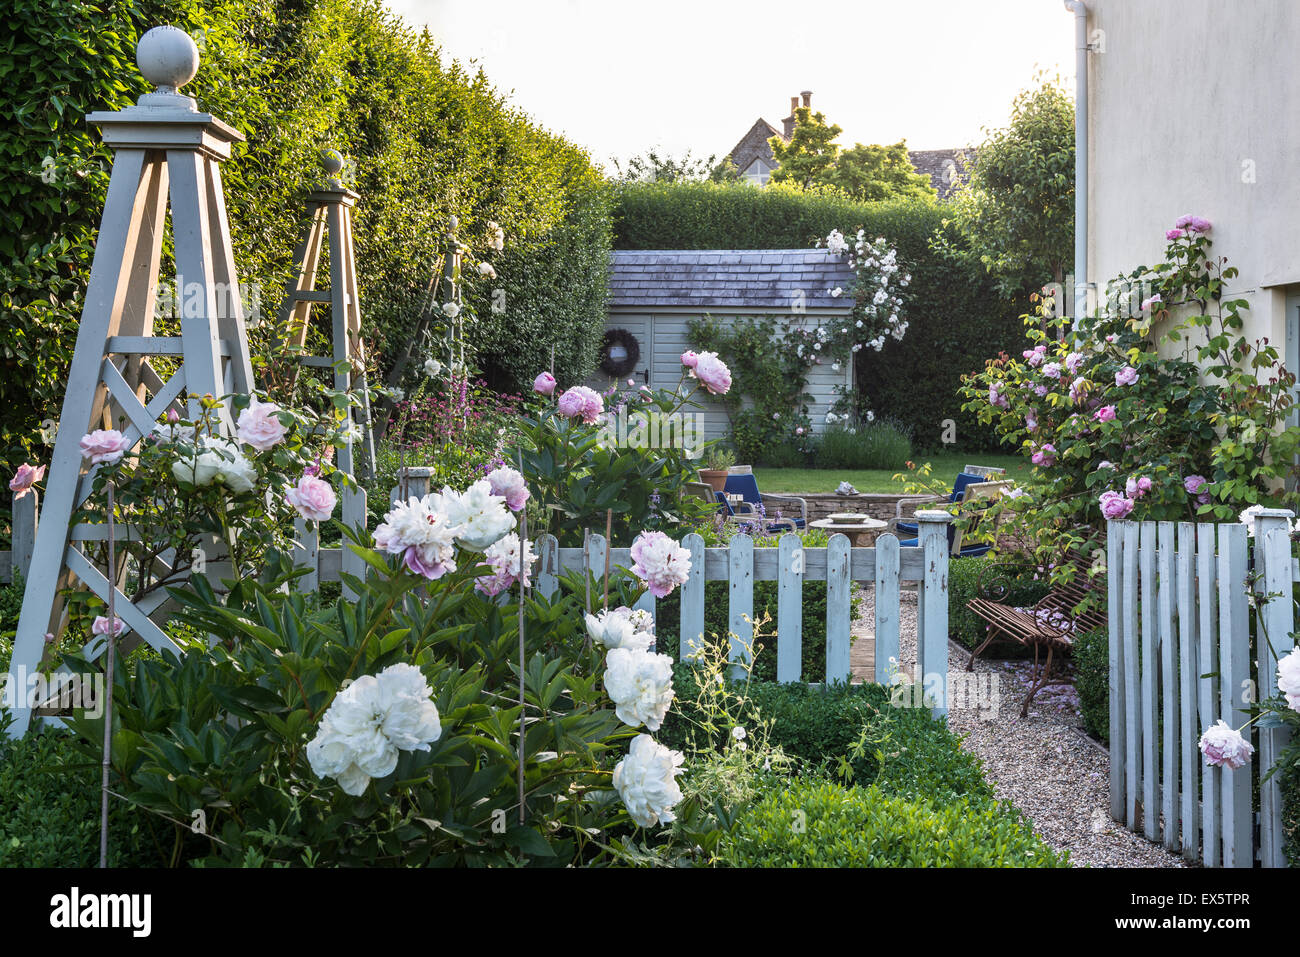 Peonies and box hedge in country garden Stock Photo